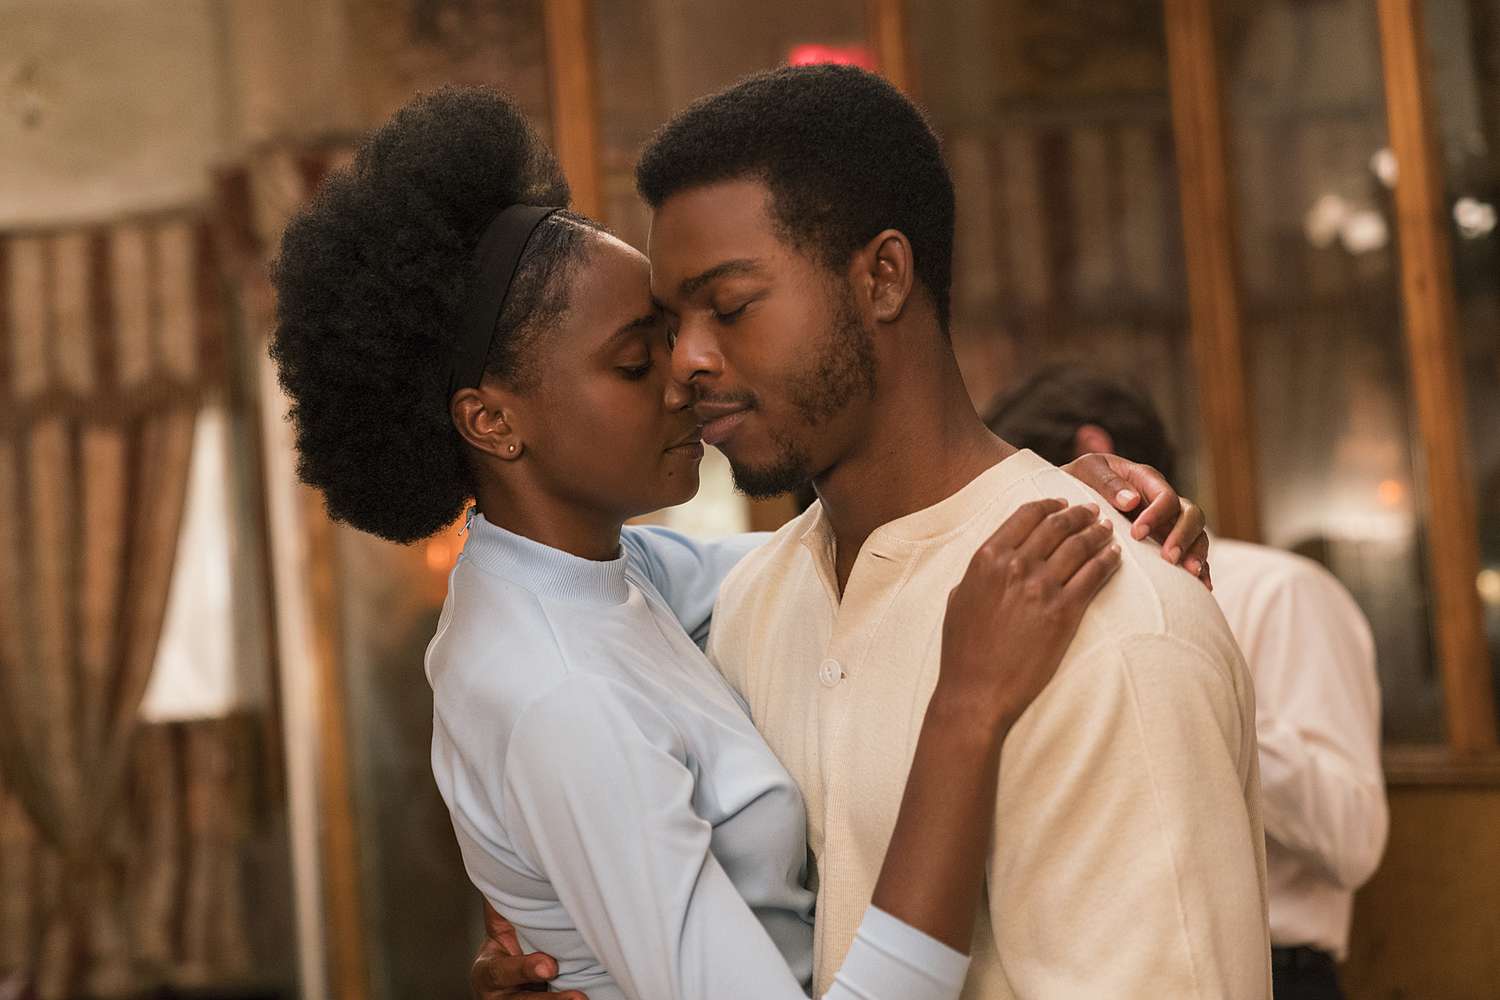 If Beale Street Could Talk - Best Picture, Best Director (Barry Jenkins), Best Supporting Actress (Regina King)